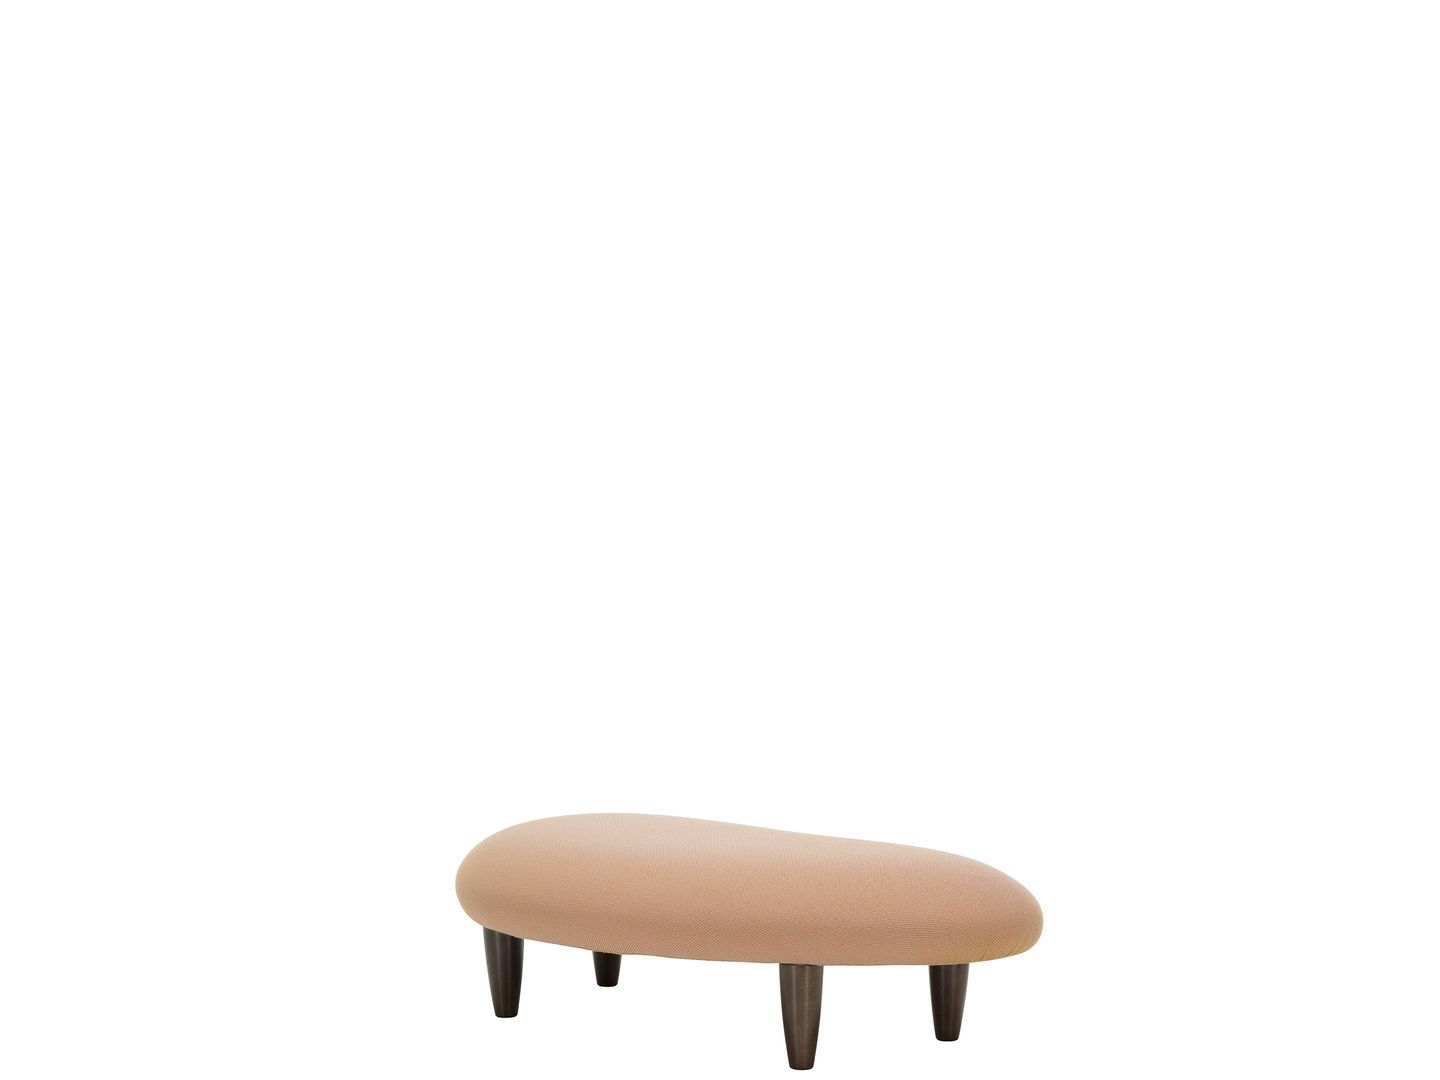 Vitra Freeform Ottoman from One52 Furniture